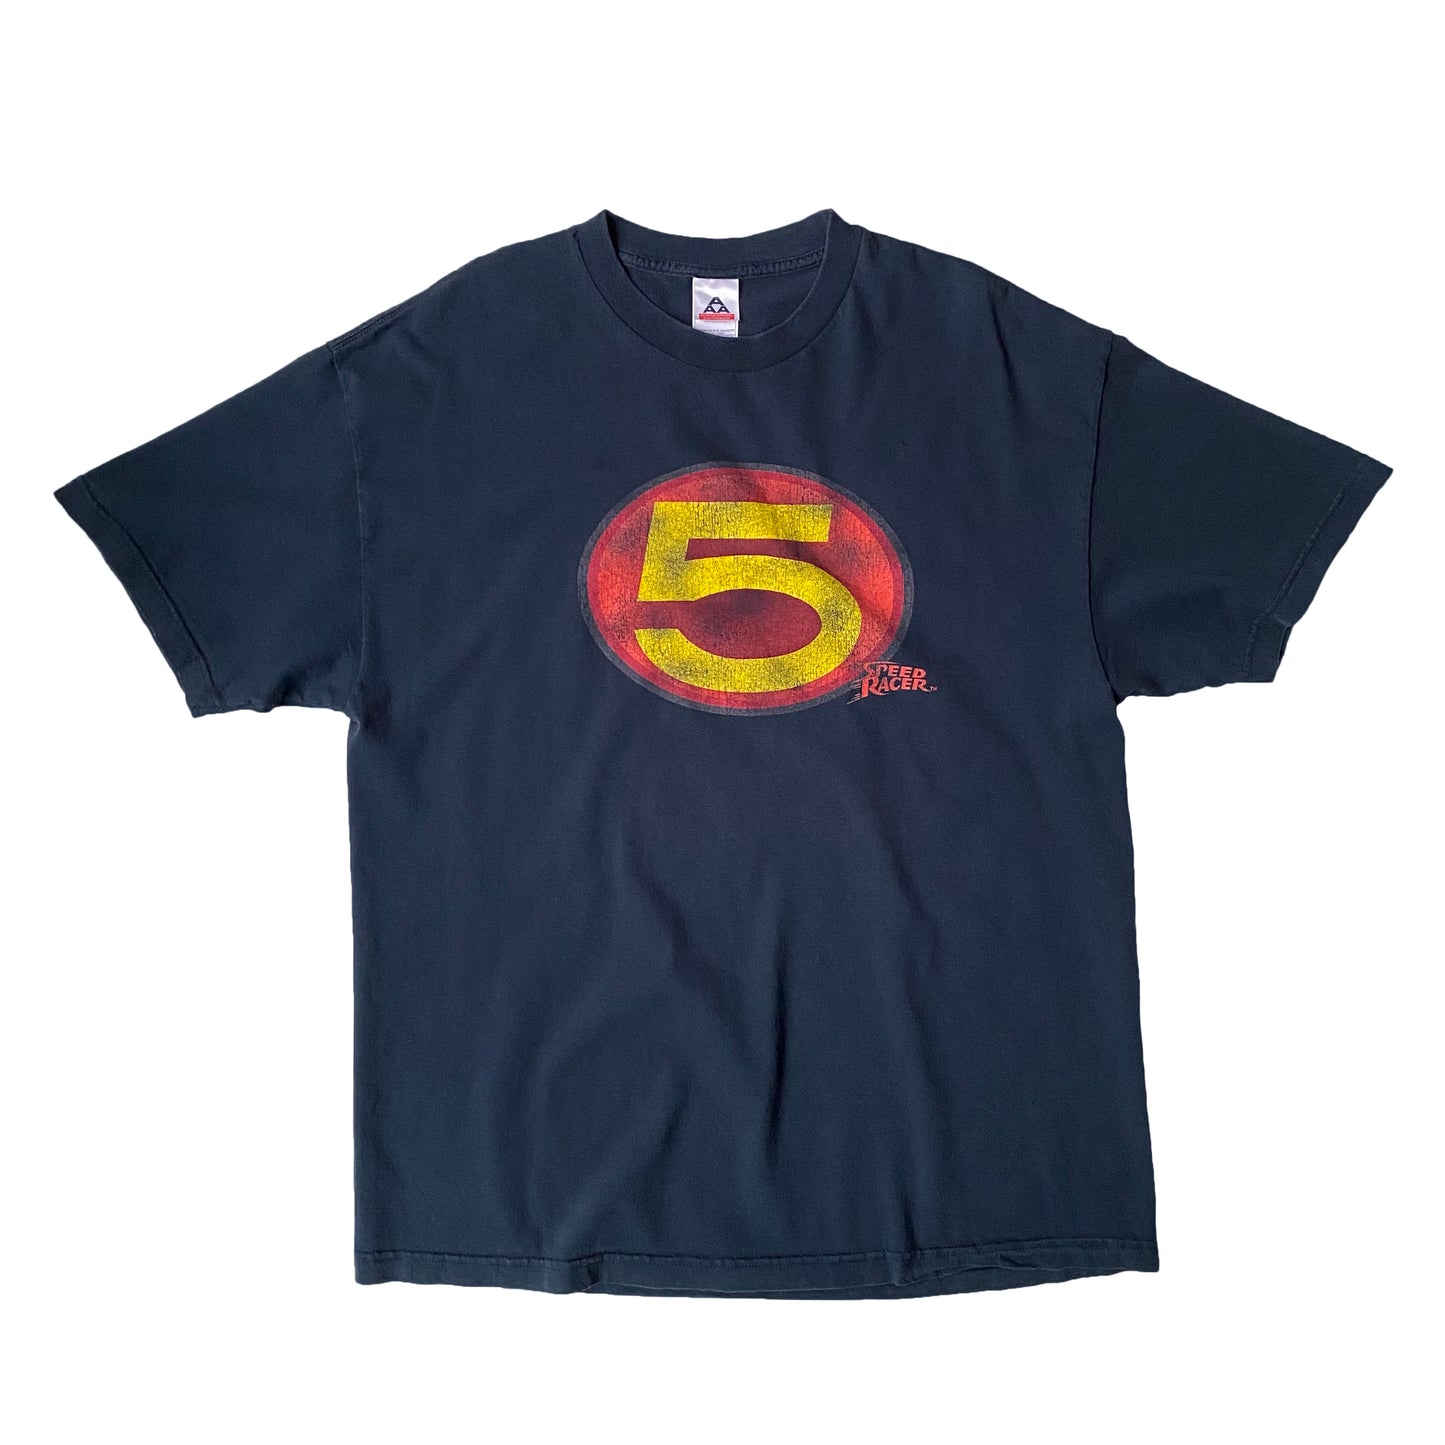 00's SPEED RACER "MACH 5" NUMBERING T-SHIRT